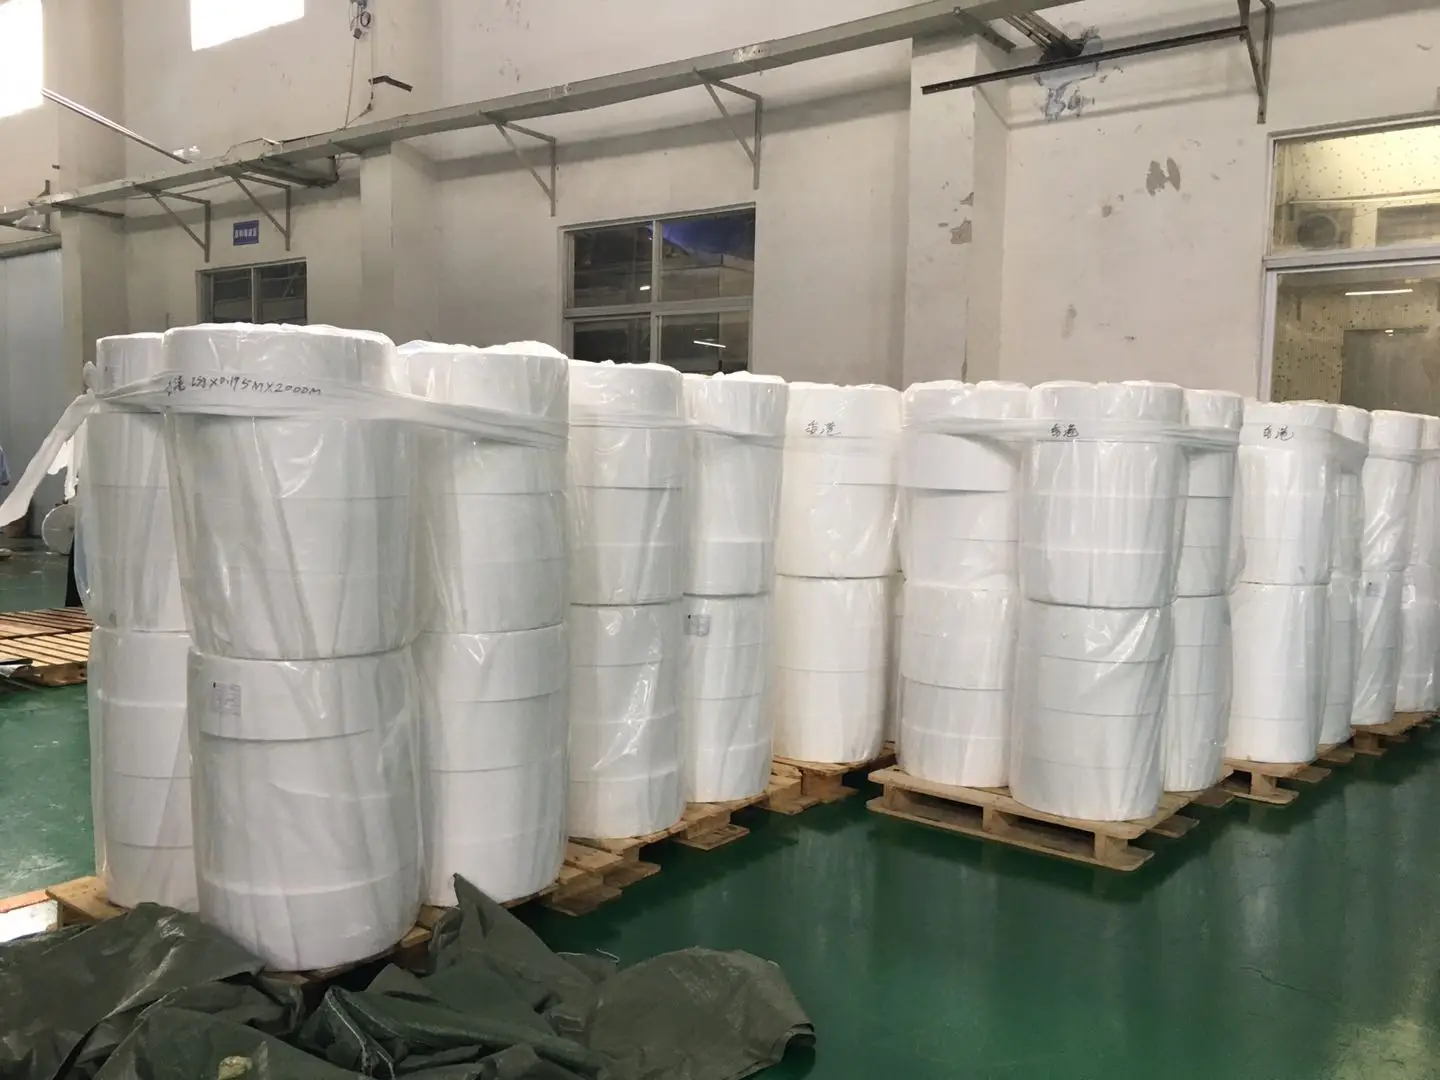 
China face mask and gowns non woven supplier polypropylene nonwoven roll fabric raw materials nonwoven fabric 